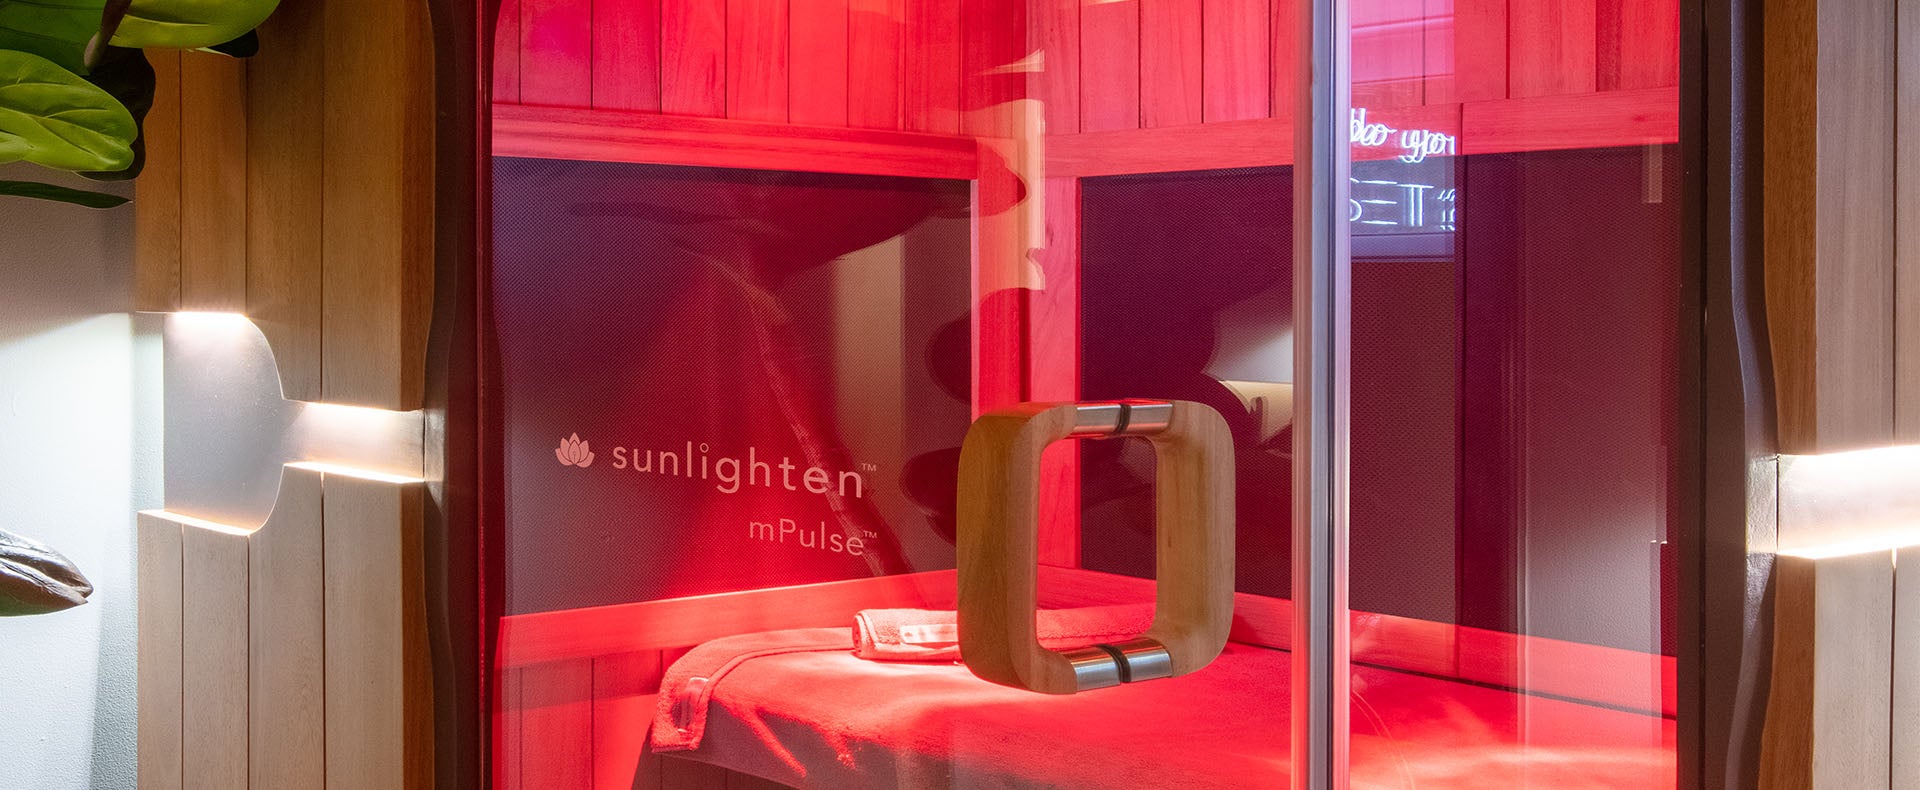 Sunlighten mPulse sauna with red chromotherapy lights on